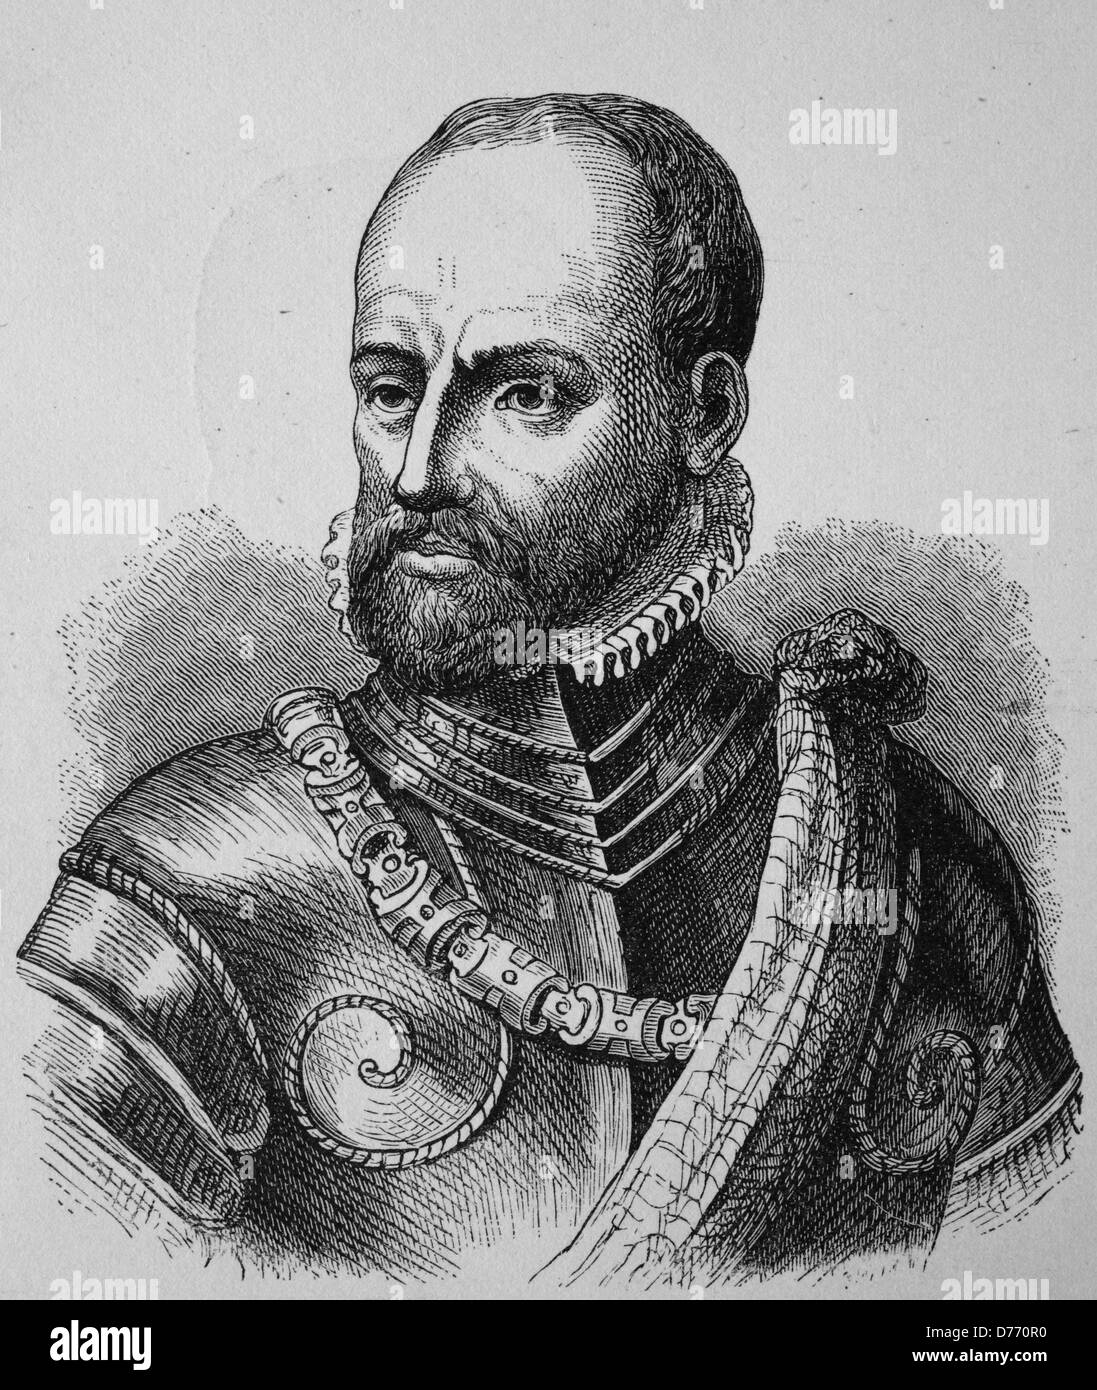 Philippe de Montmorency, Count of Horn, 1518 - 1568, Dutch admiral, freedom fighter, knight of the Order of the Golden Fleece, h Stock Photo